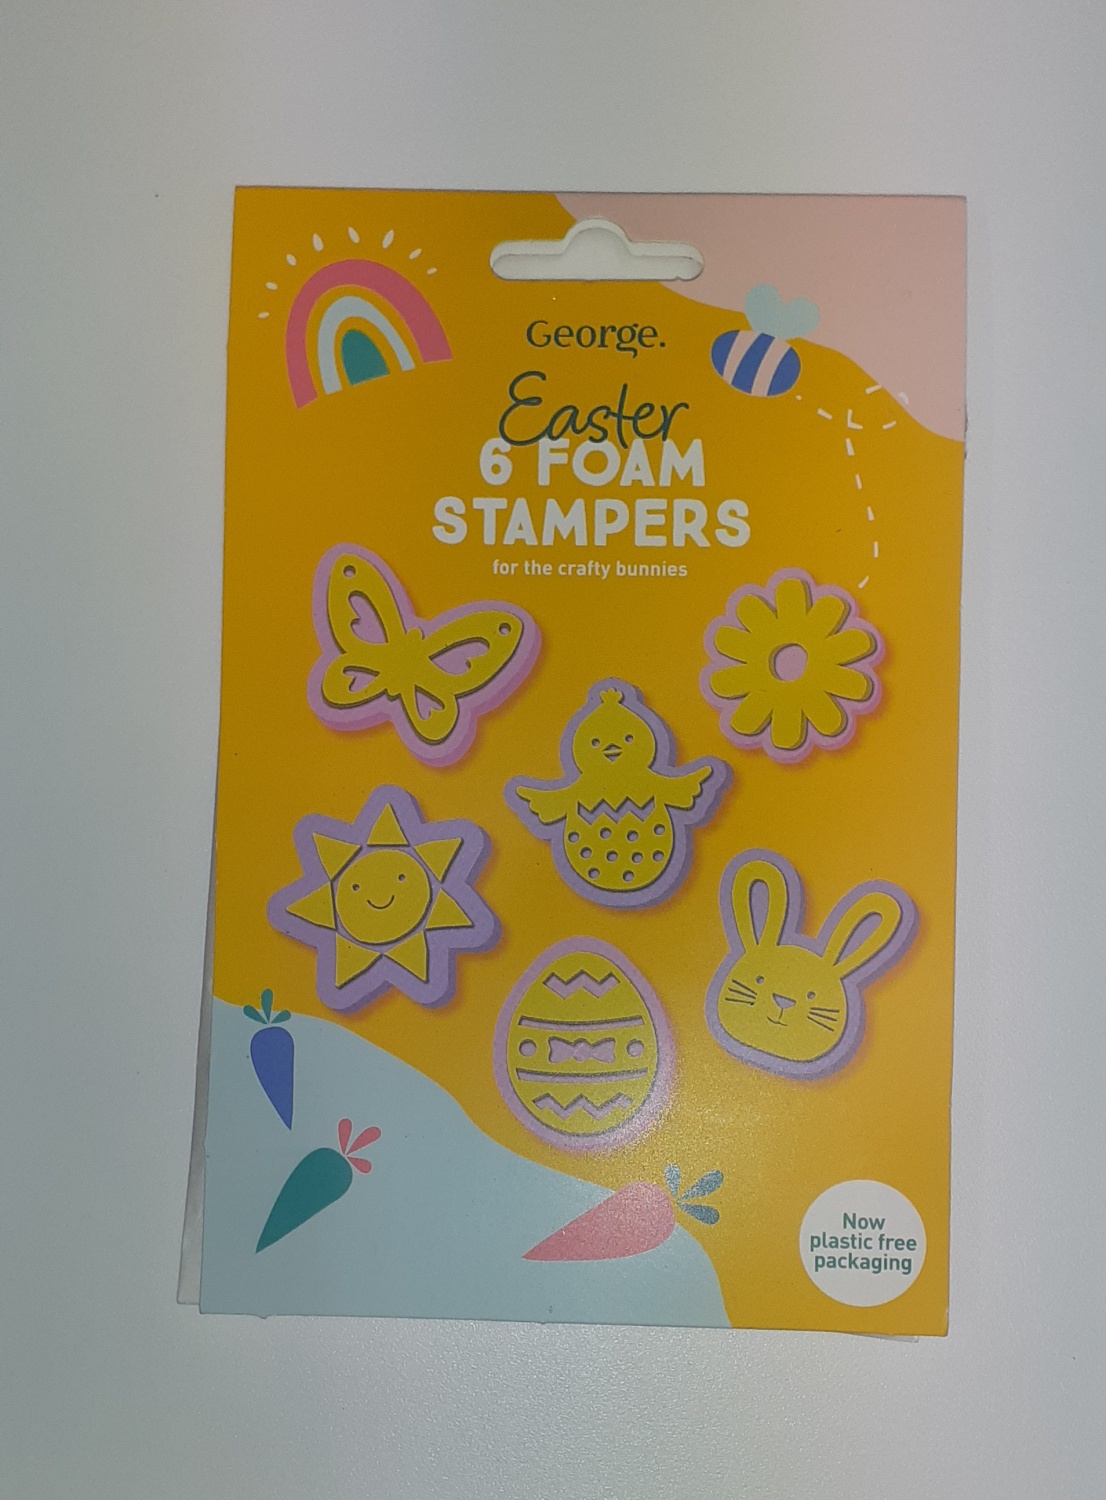 George Easter 6 Pack Foam Stampers RRP £1 CLEARANCE XL 39p or 3 for 99p